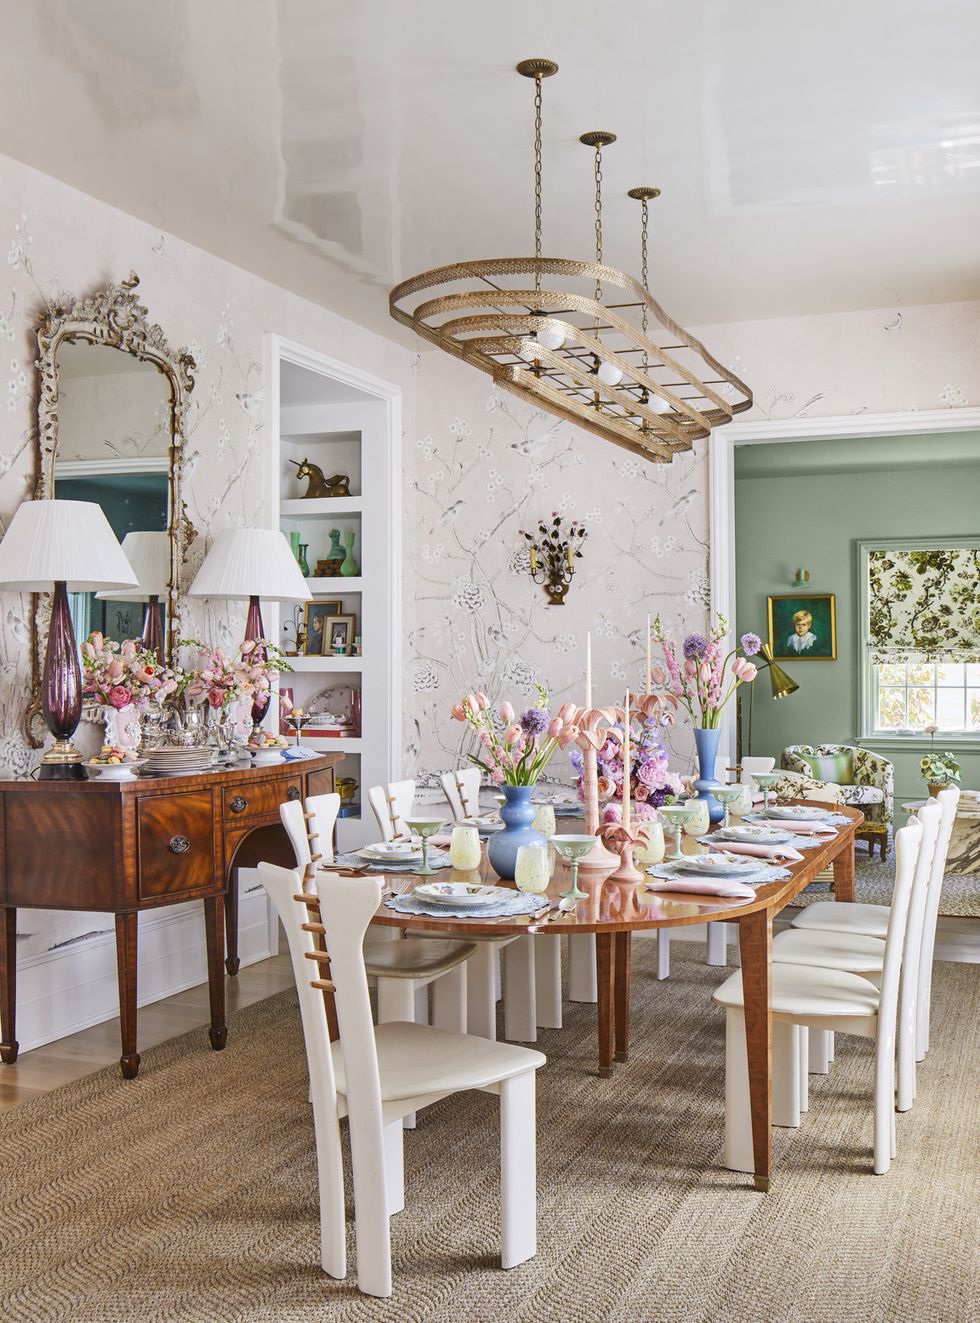 9 Dining Chair Designs For Your Home